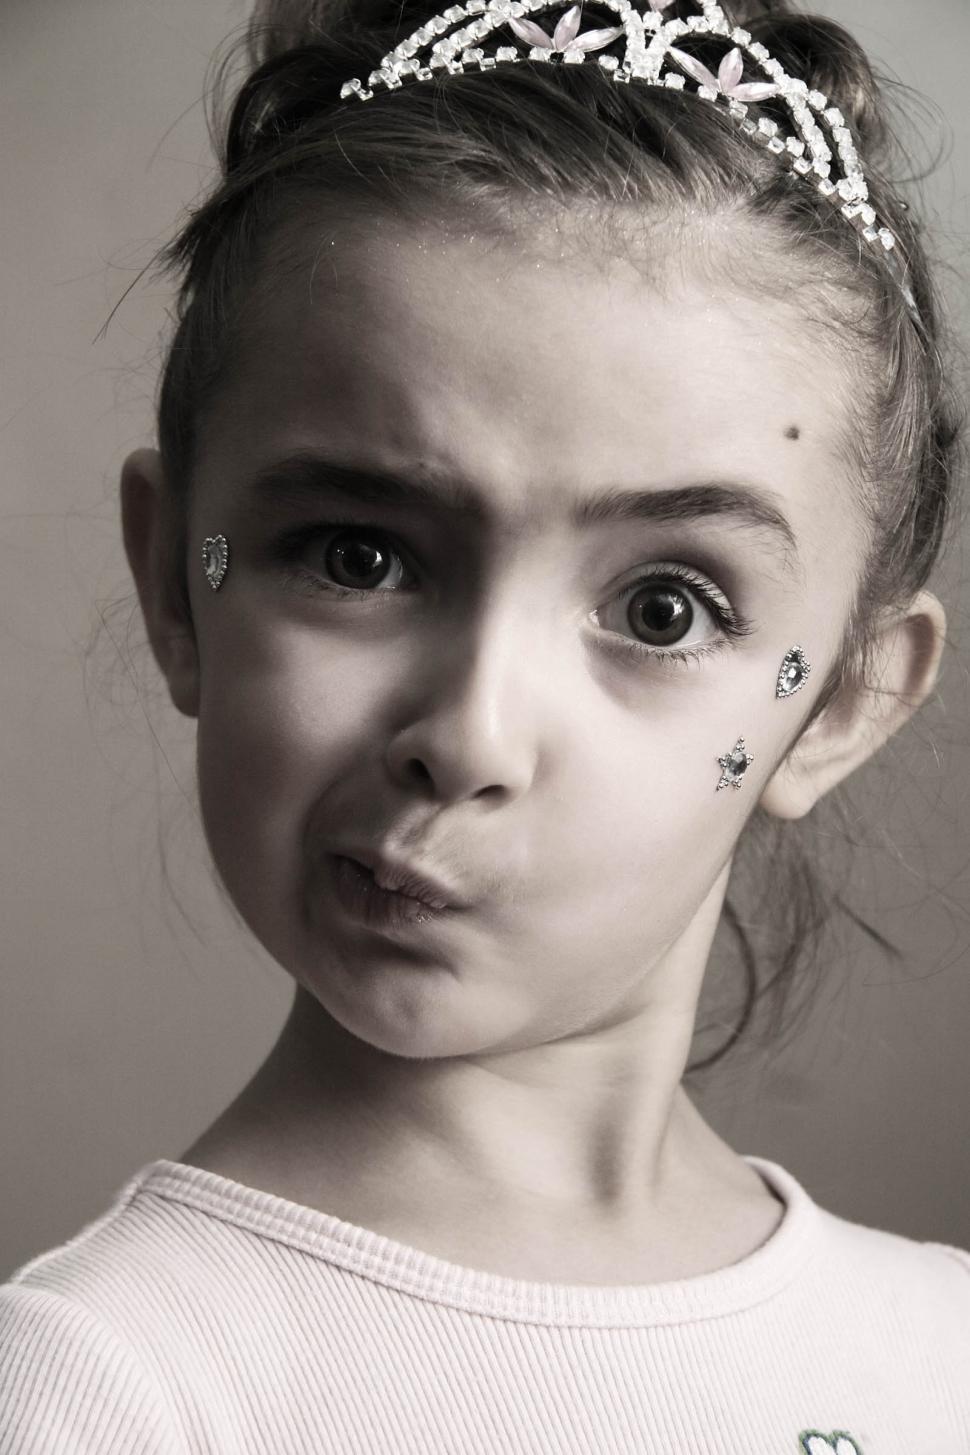 Free Image of Puzzled little girl princess 